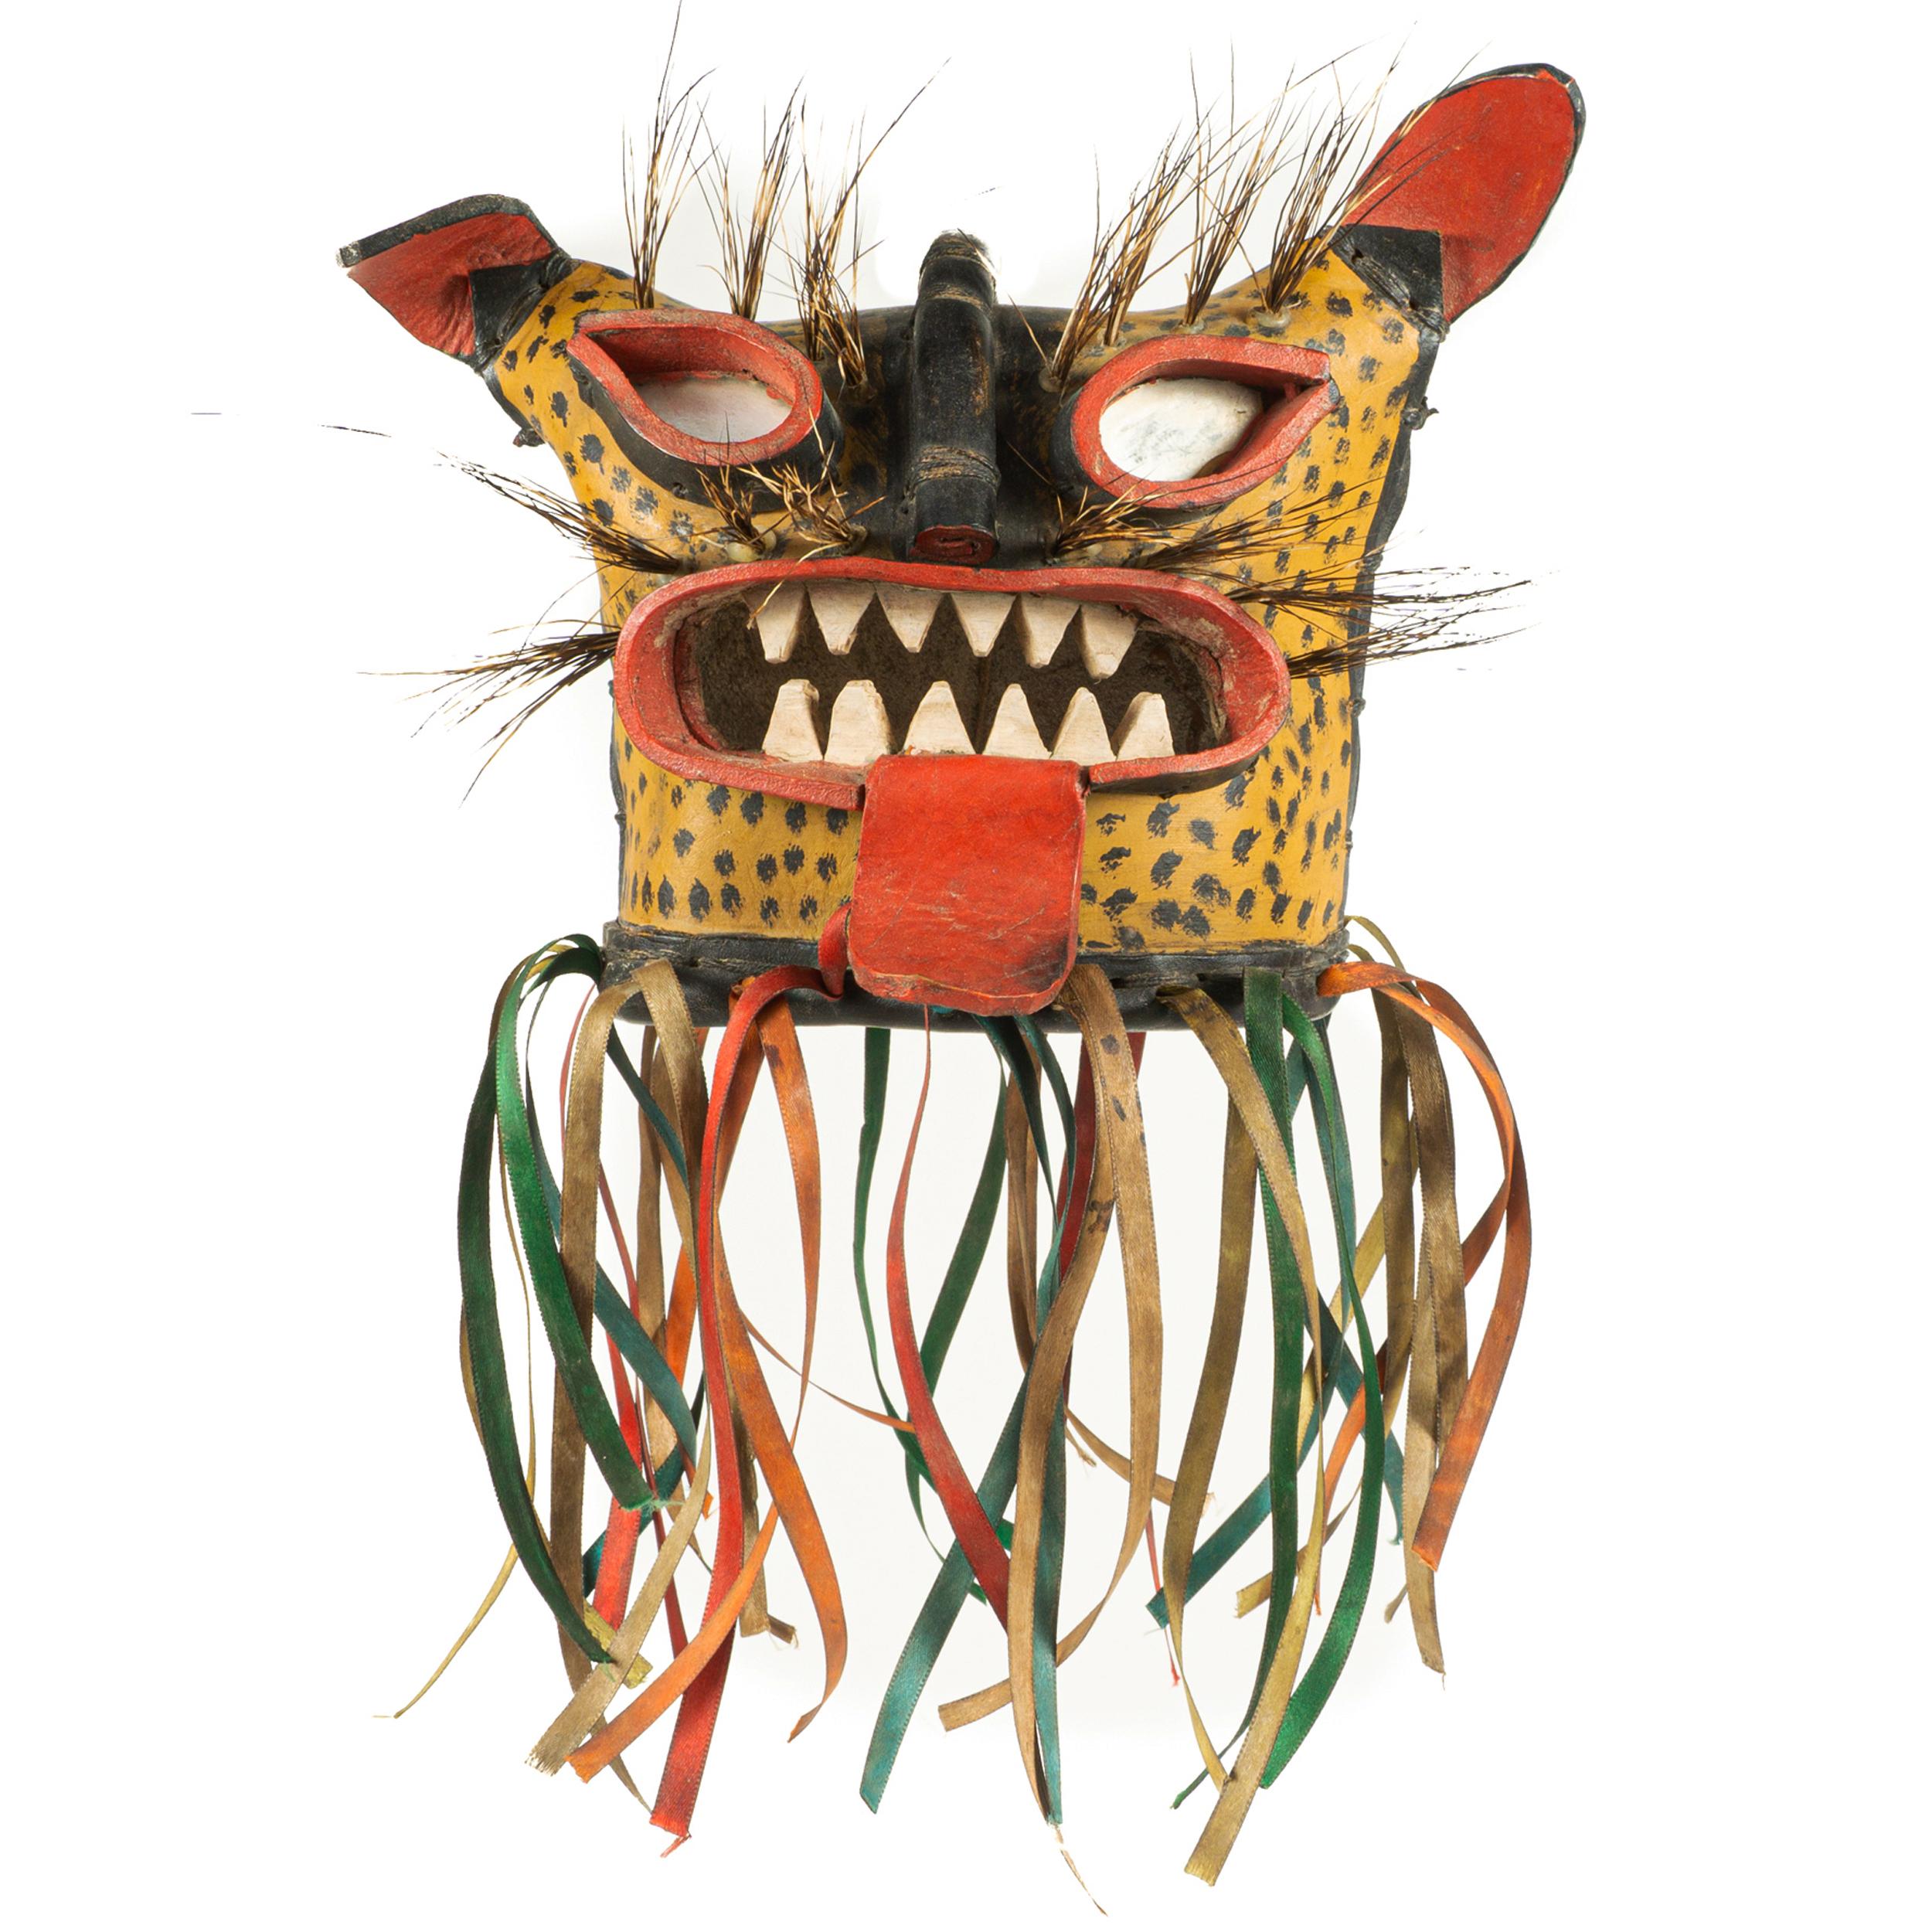 This style of Tigre (Mexican colloquial for Jaguar) mask is from Zitlala, Guerrero, they are used on the feast day of the Holy Cross on May 3rd, 4th,
and 5th. As part of the activities, men from different barrios put on jaguar costumes and carry